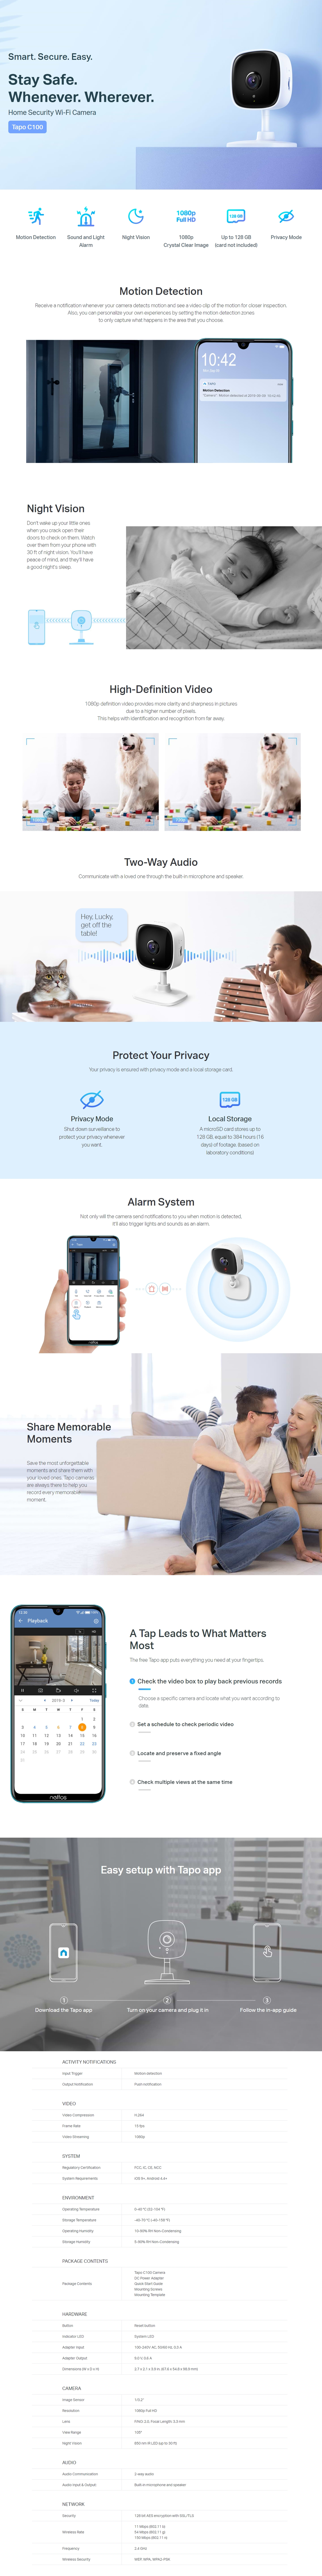 A large marketing image providing additional information about the product TP-Link Tapo C100 Home Security Wi-Fi Camera - Additional alt info not provided